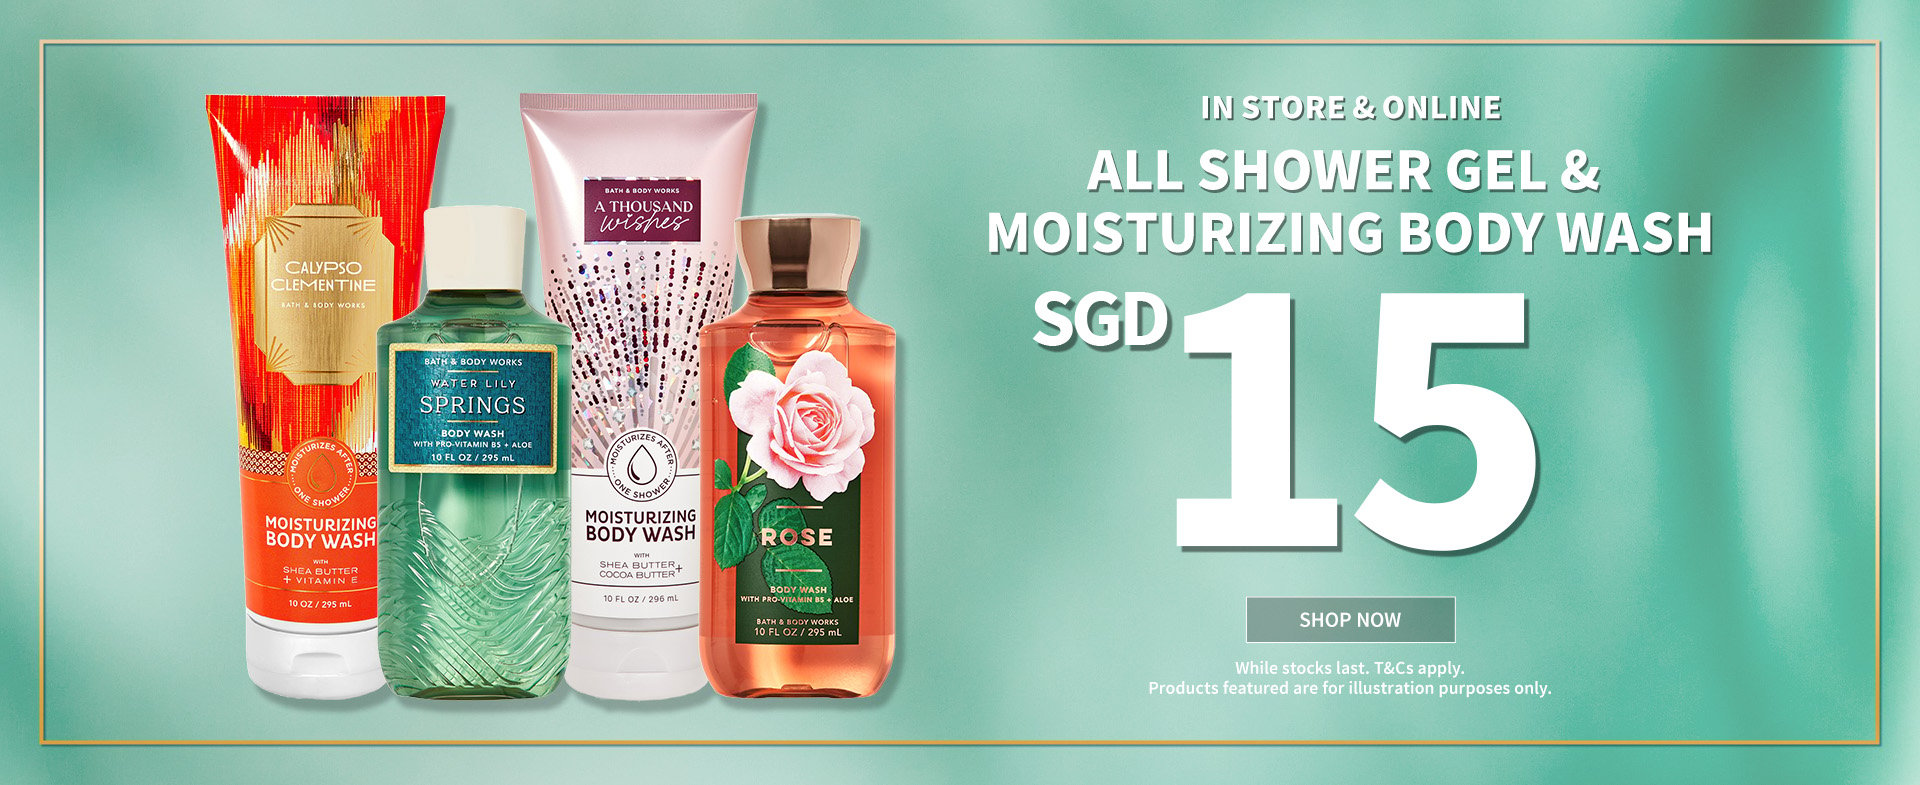 STORE and ONLINE ALL SHOWER GEL and MOISTURIZING BODY WASH $